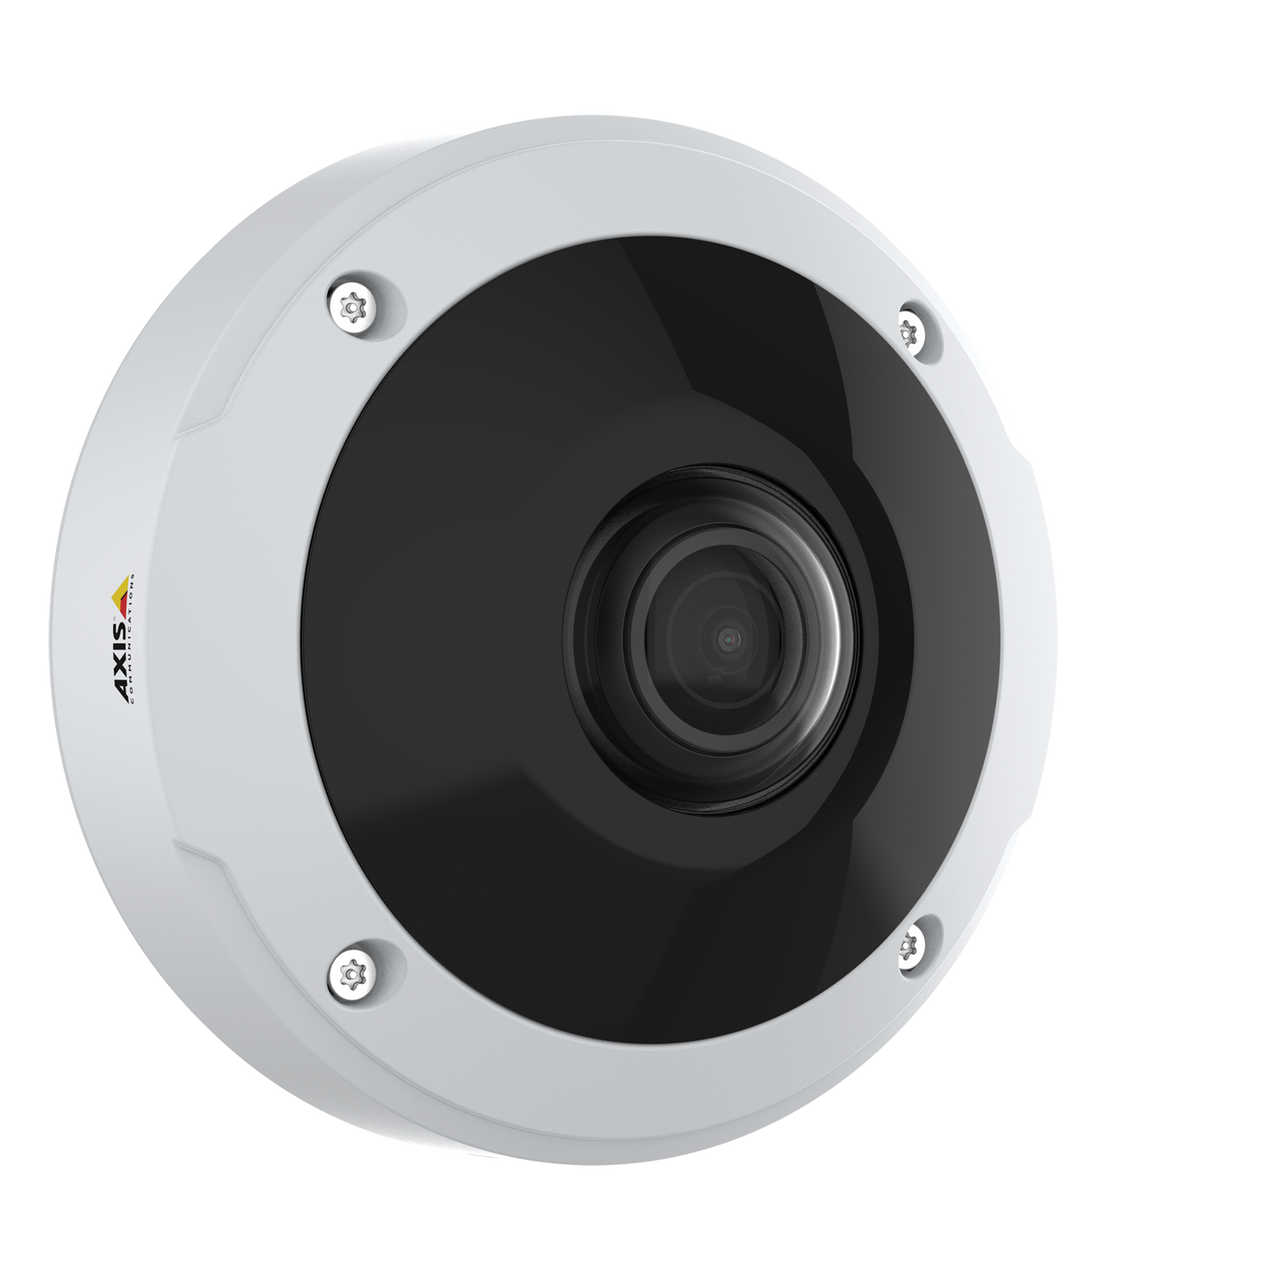 AXIS M3057-PLVE MkII 6 MP outdoor-ready dome with 360° panoramic view